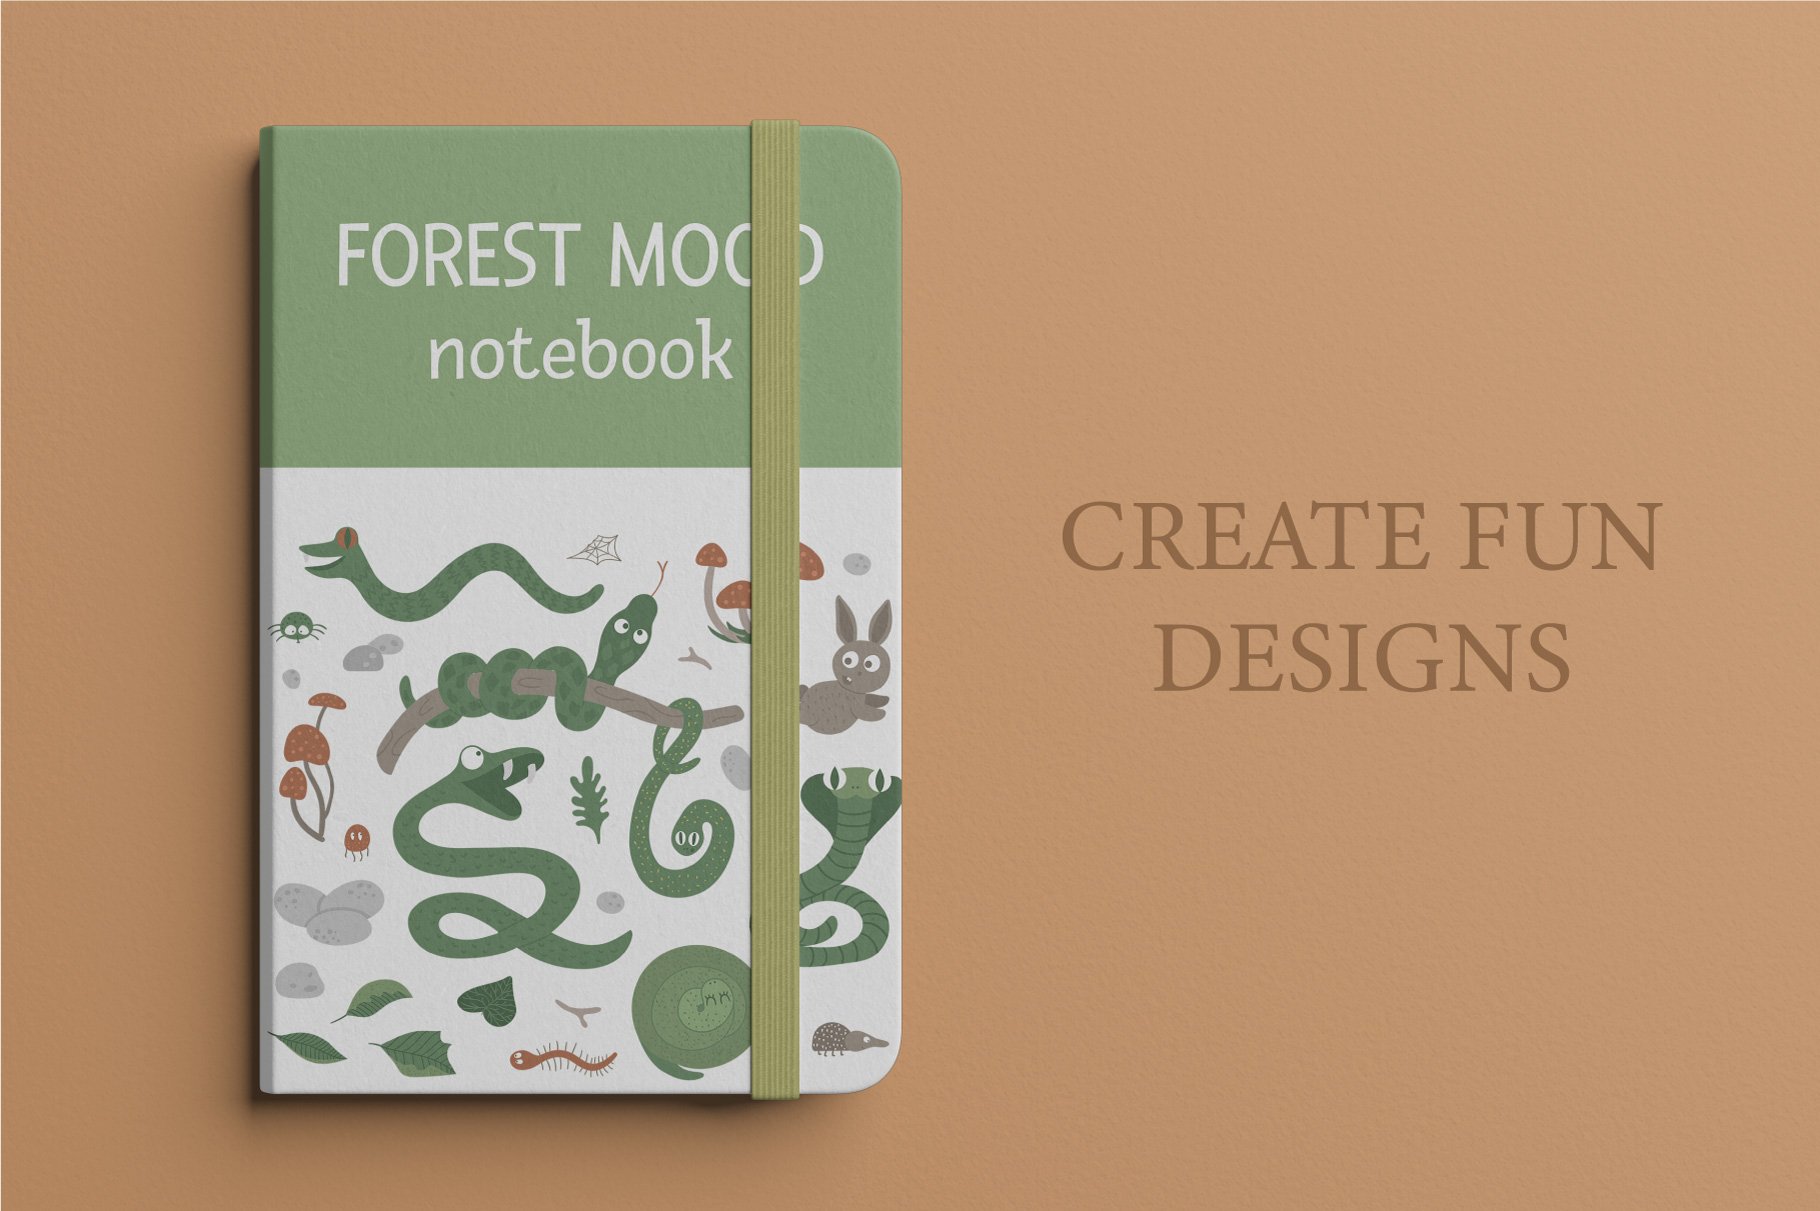 Notepad with images of cheerful snakes and hares on a brown background.